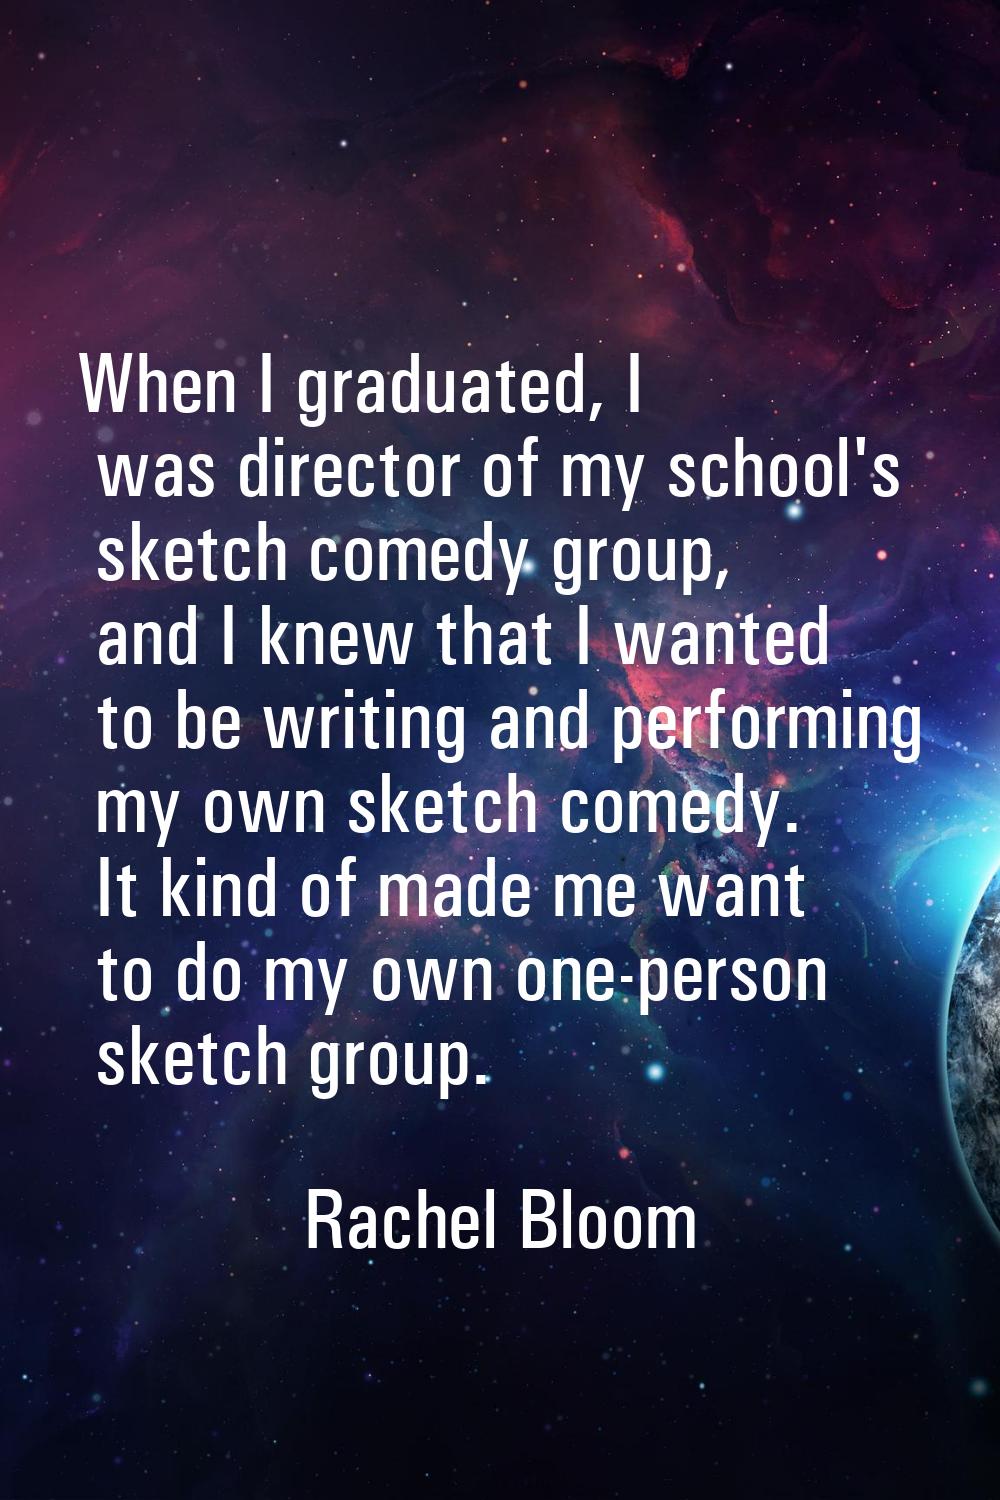 When I graduated, I was director of my school's sketch comedy group, and I knew that I wanted to be